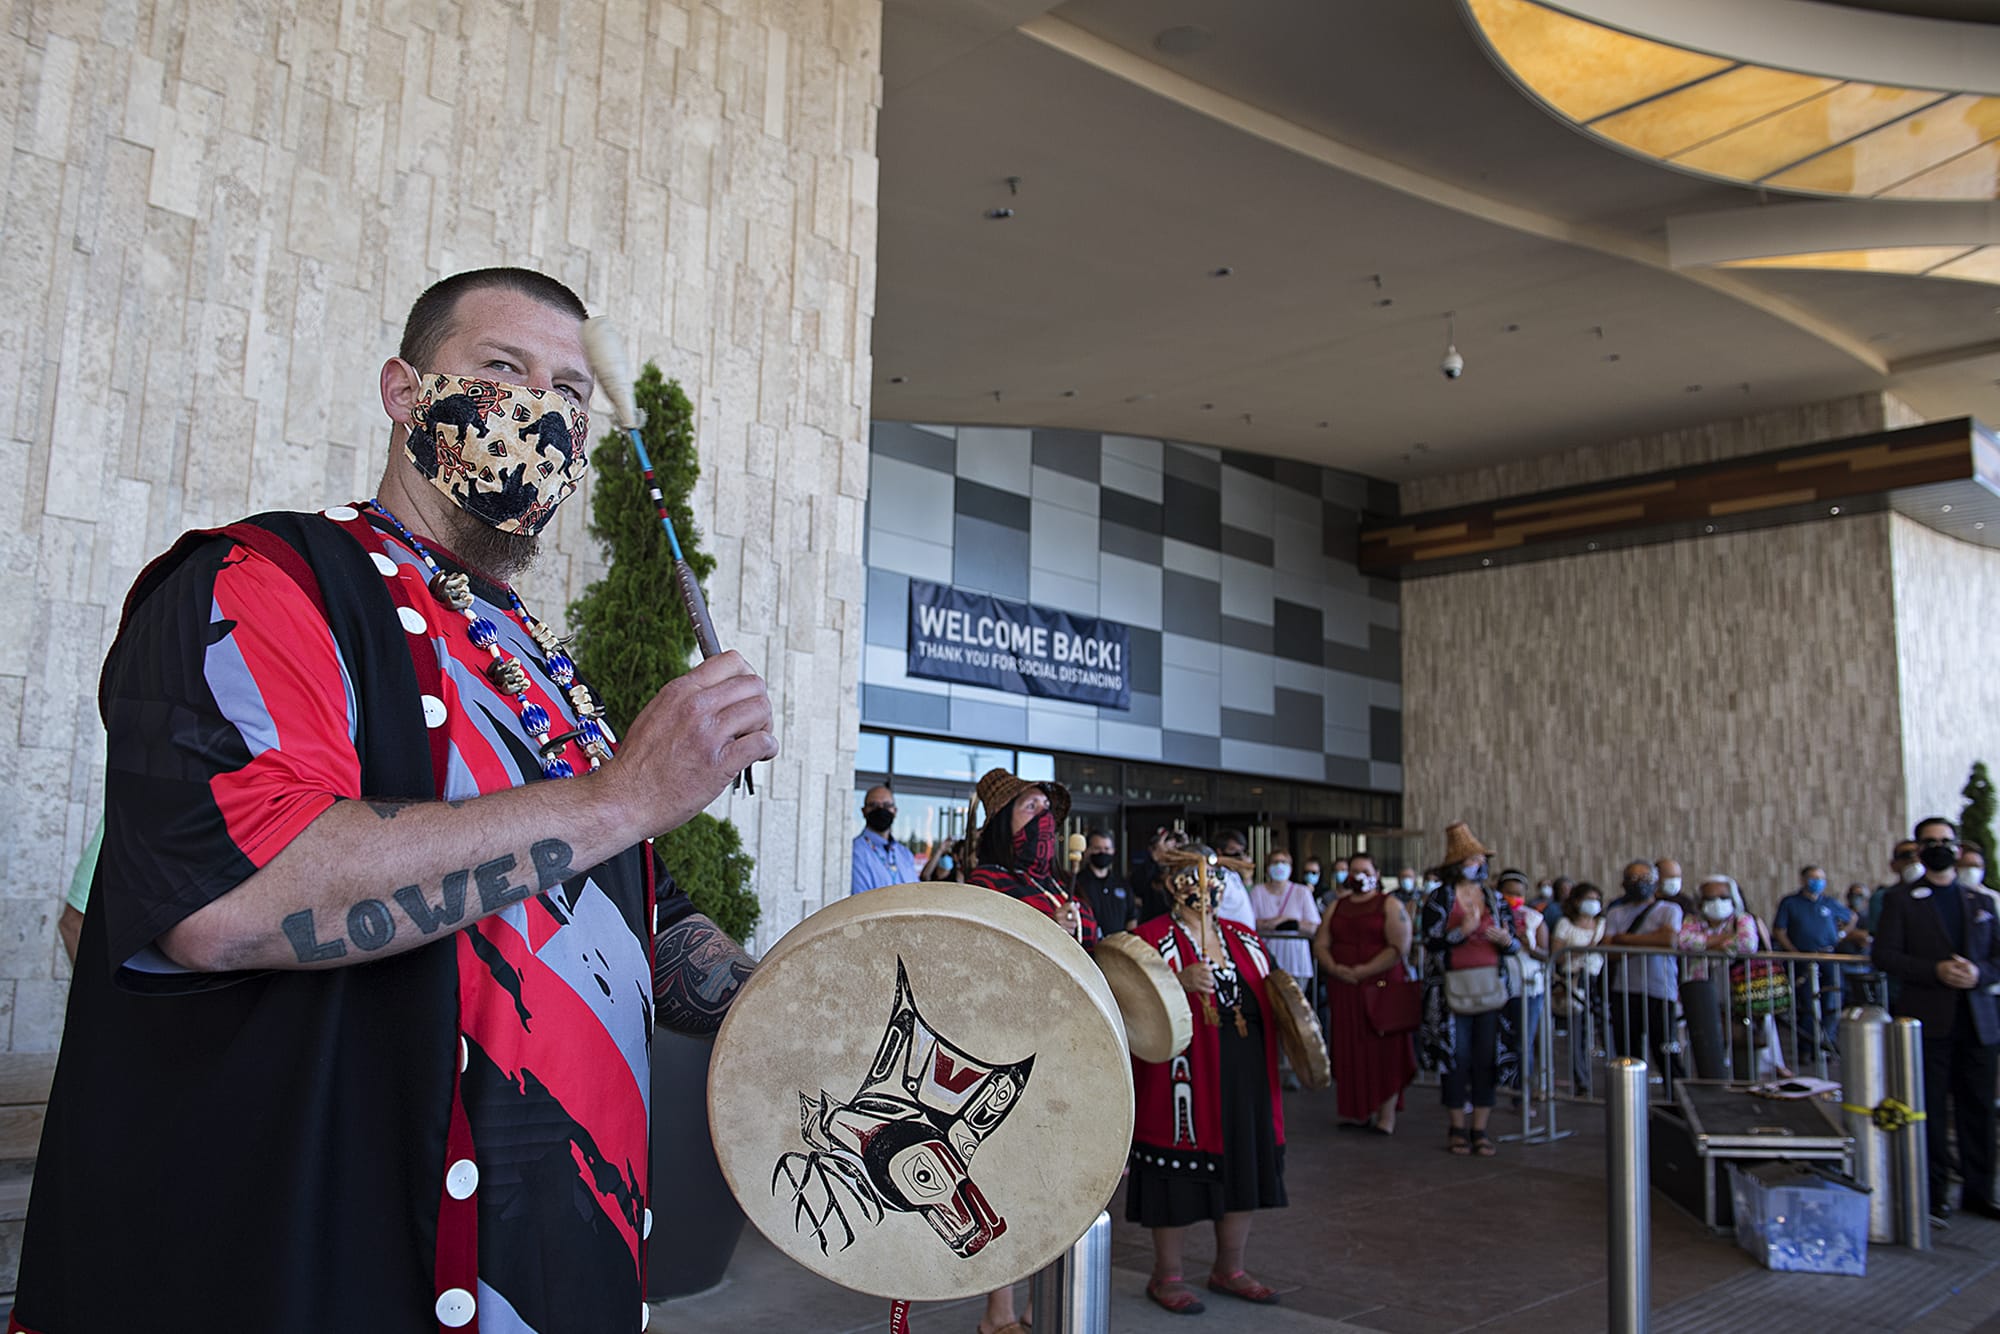 Jeramiah Wallace of the Cowlitz Drum Group, left, keeps the beat while celebrating the reopening of ilani Casino Resort with the crowd on Thursday morning, May 28, 2020.